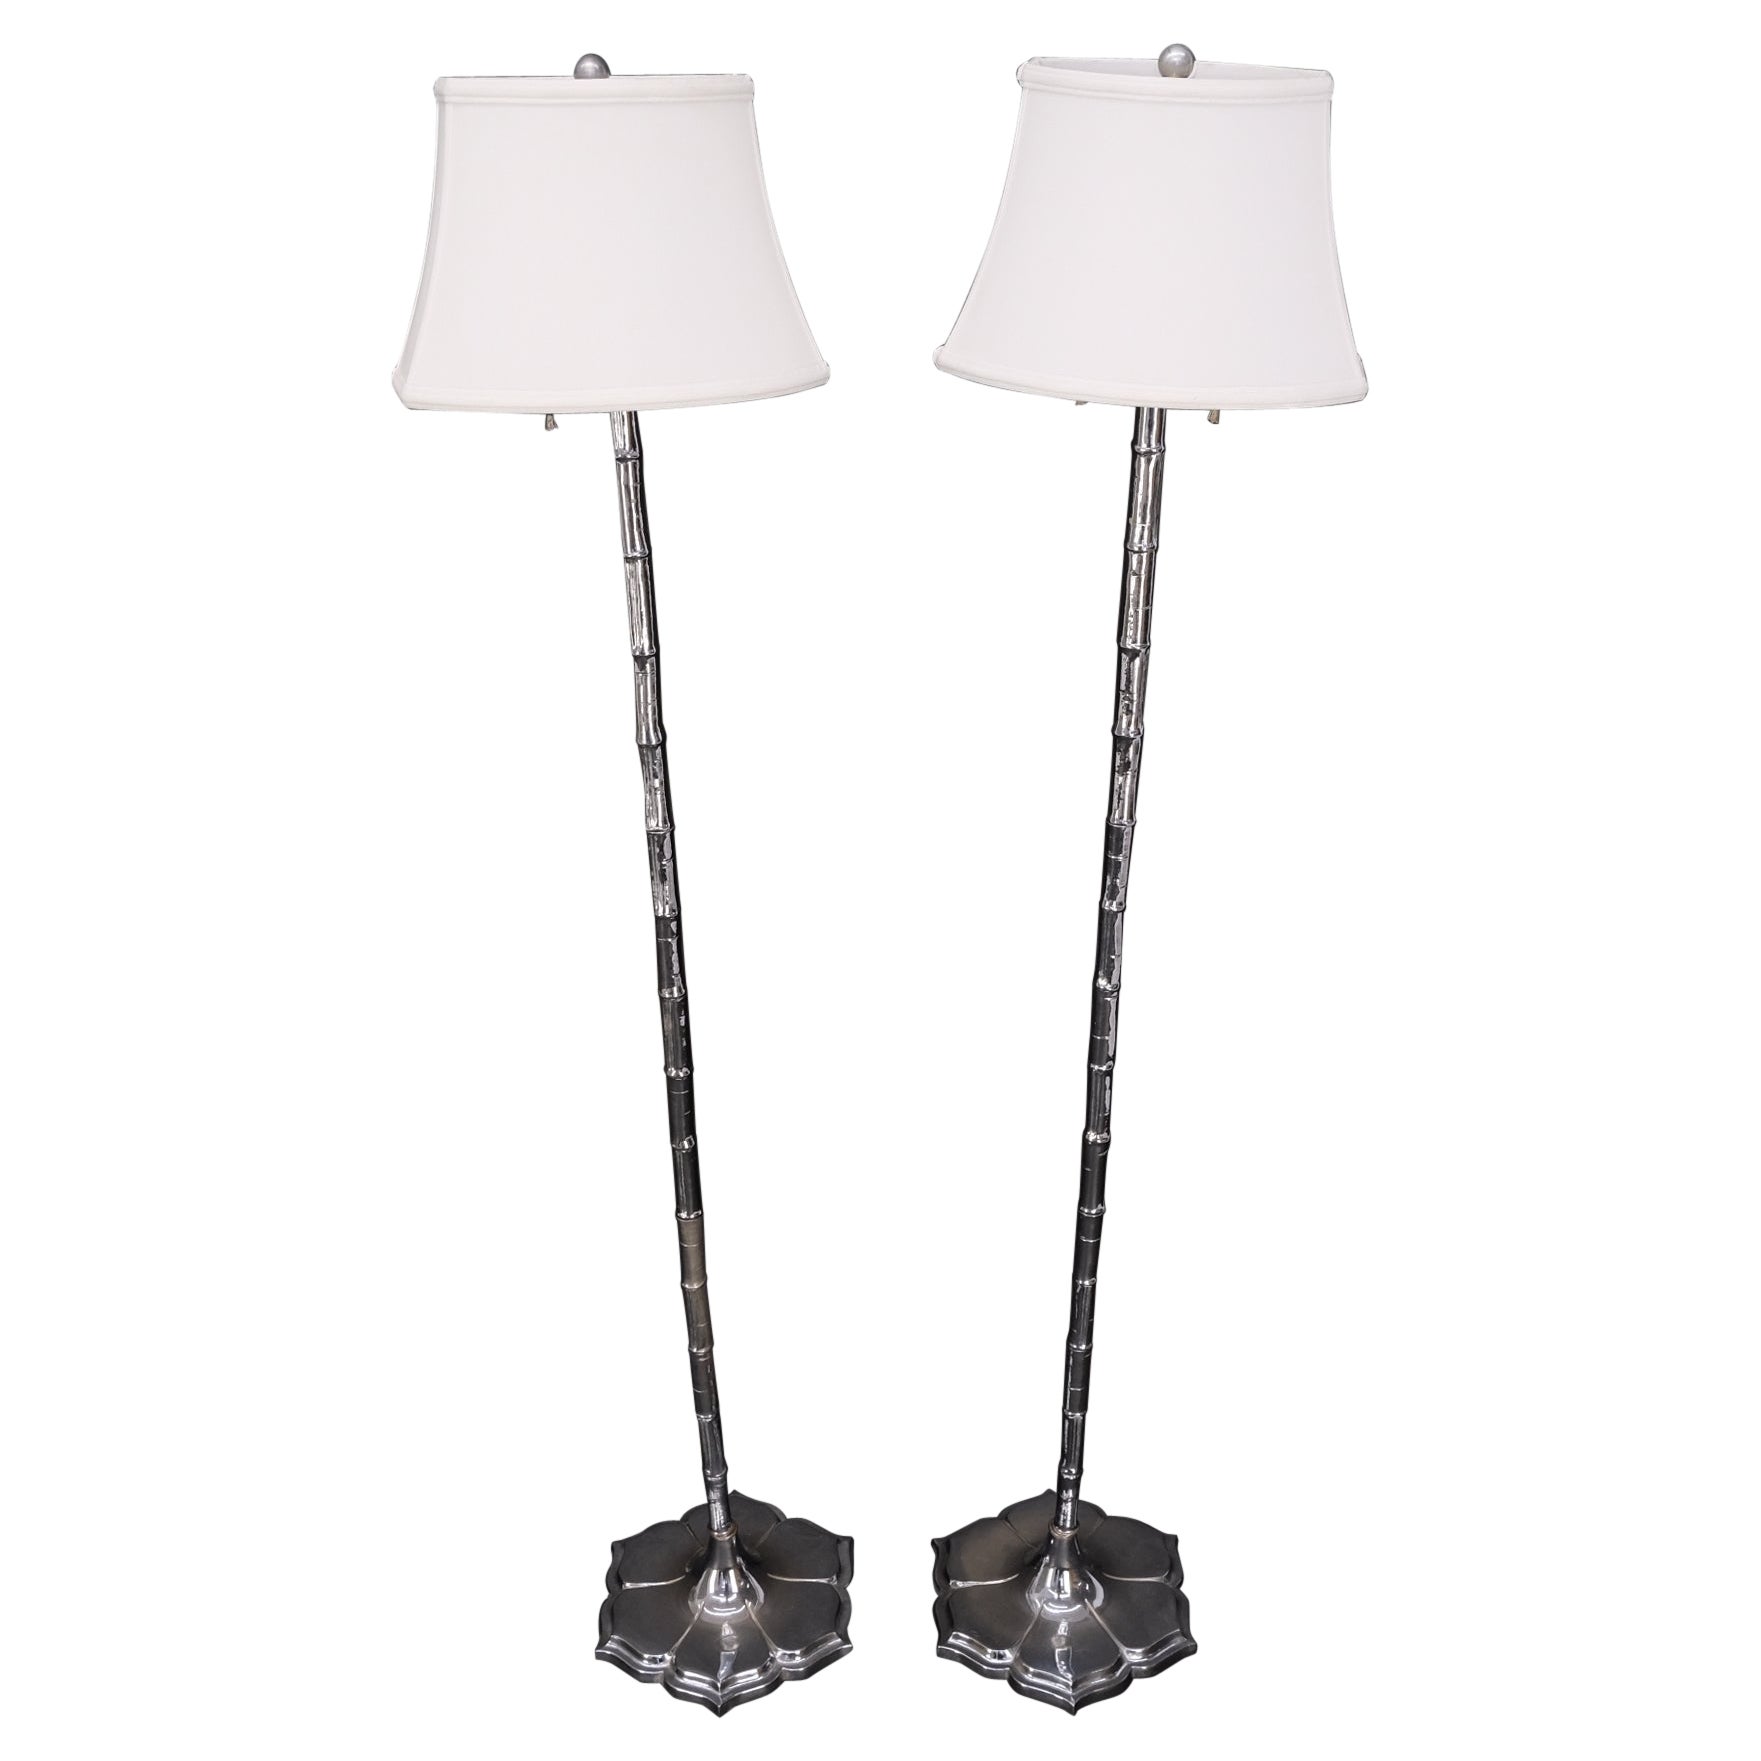 Pair of Mid-century Italian Lamps on Marble Bases For Sale at 1stDibs